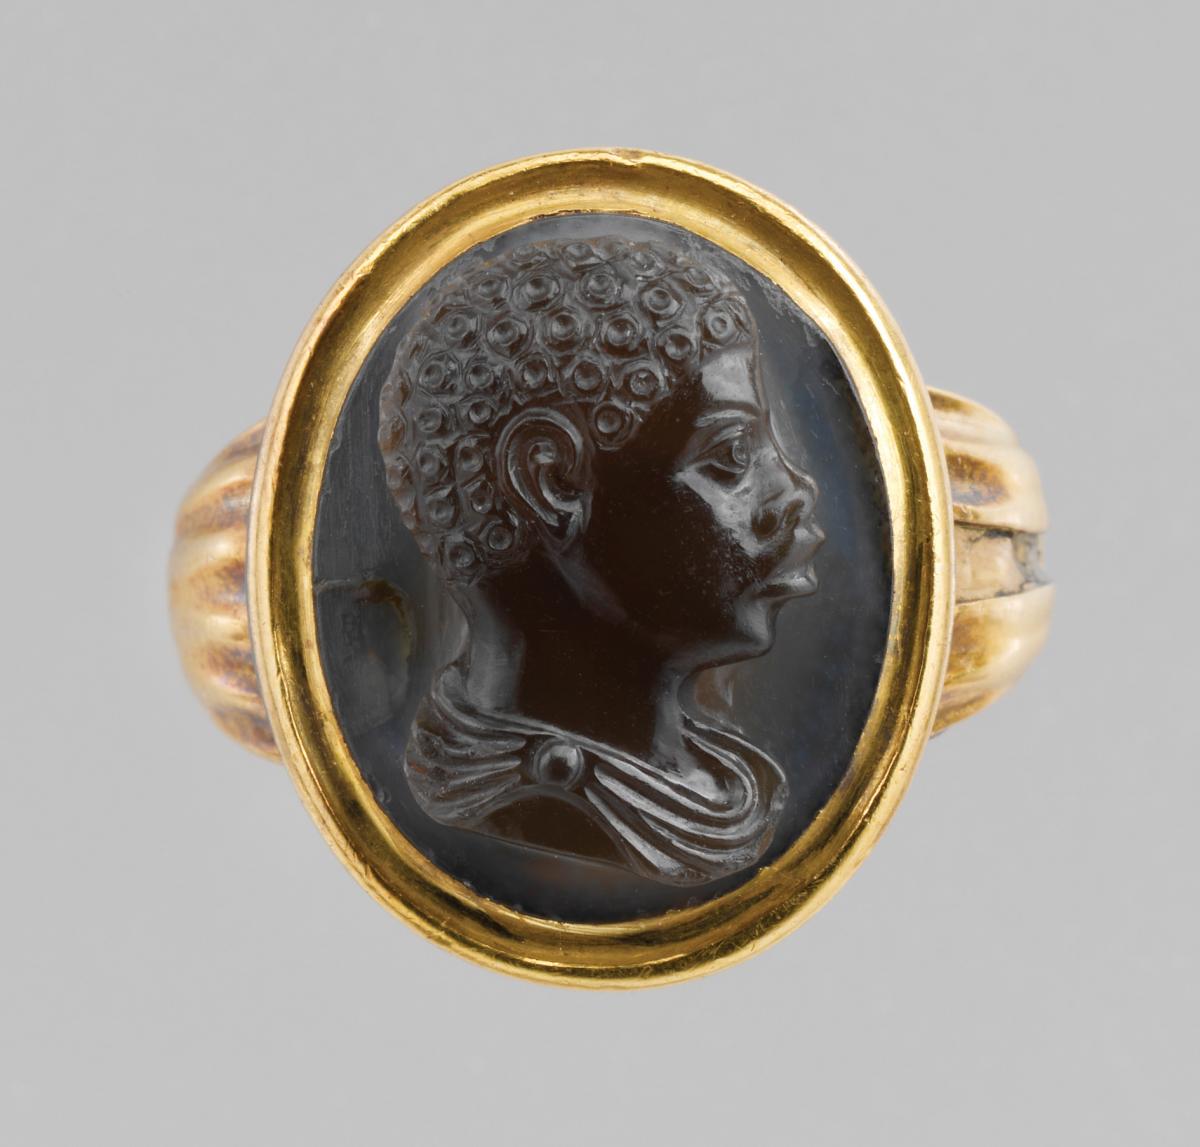 Gold frame with a black stone in the center, carved with the profile of a young African boy